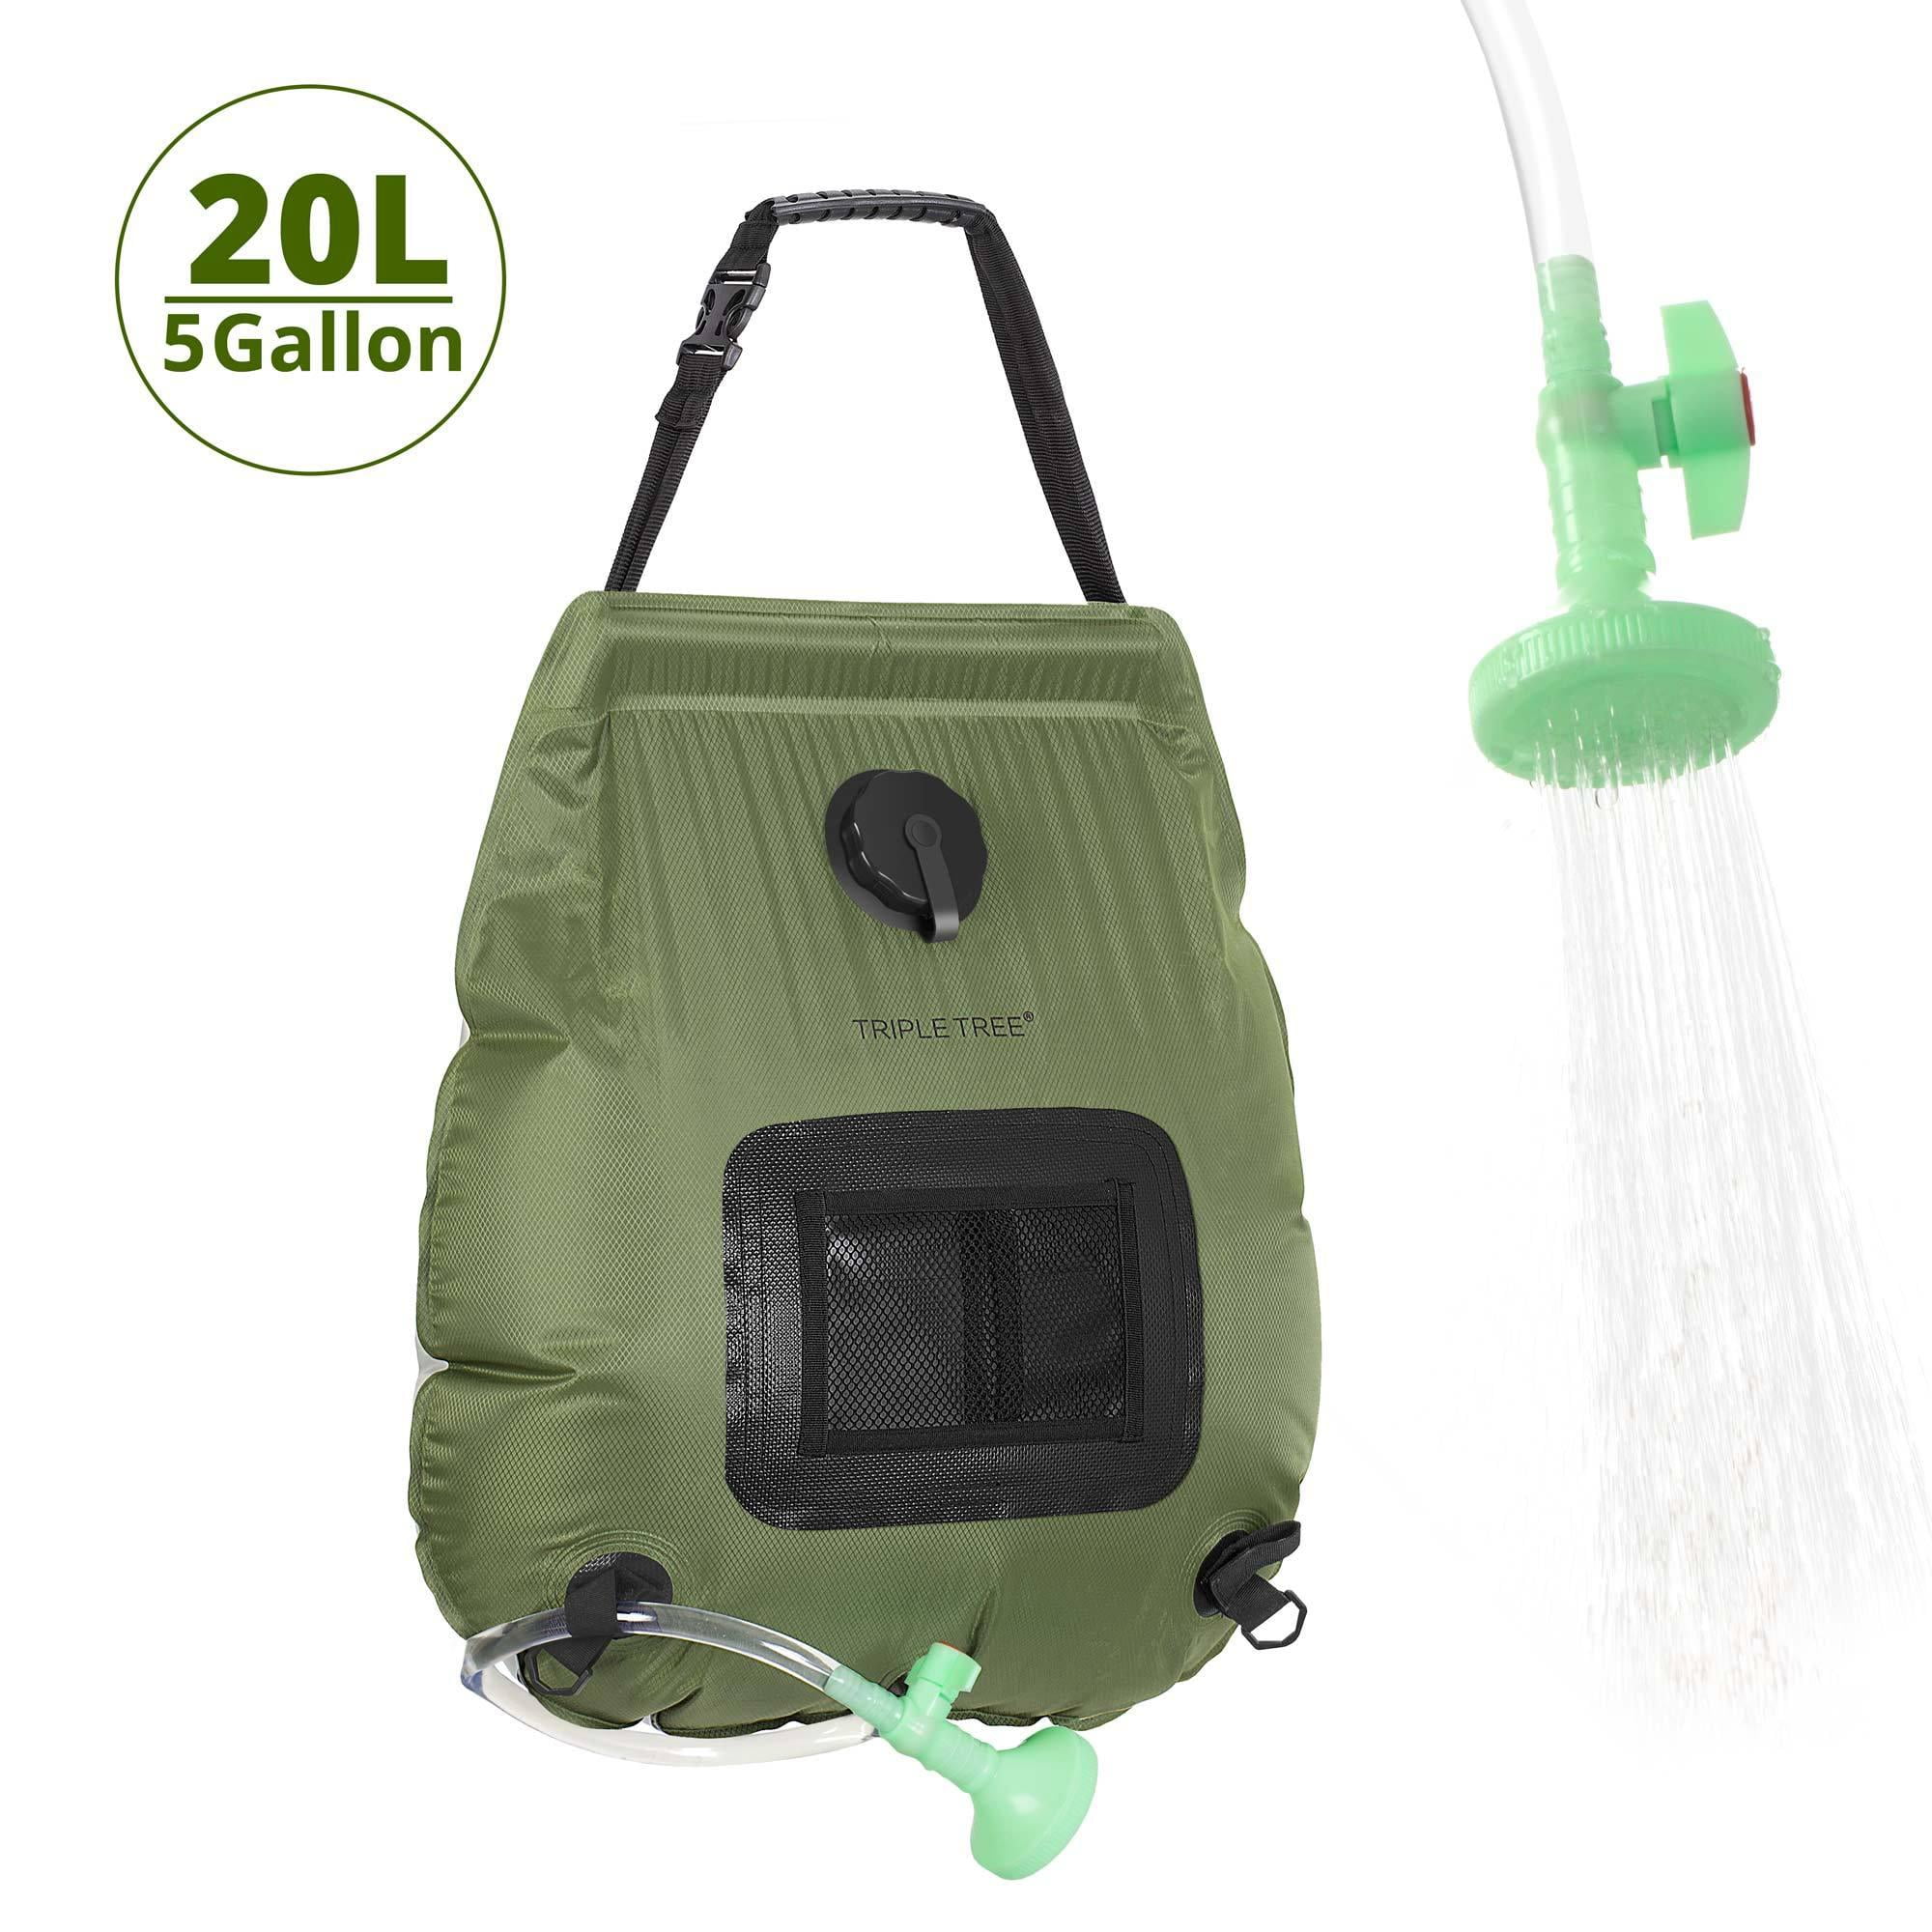 20/40L Portable Solar Camping Shower Bag Outdoor Hiking Heating Water Bath Set 